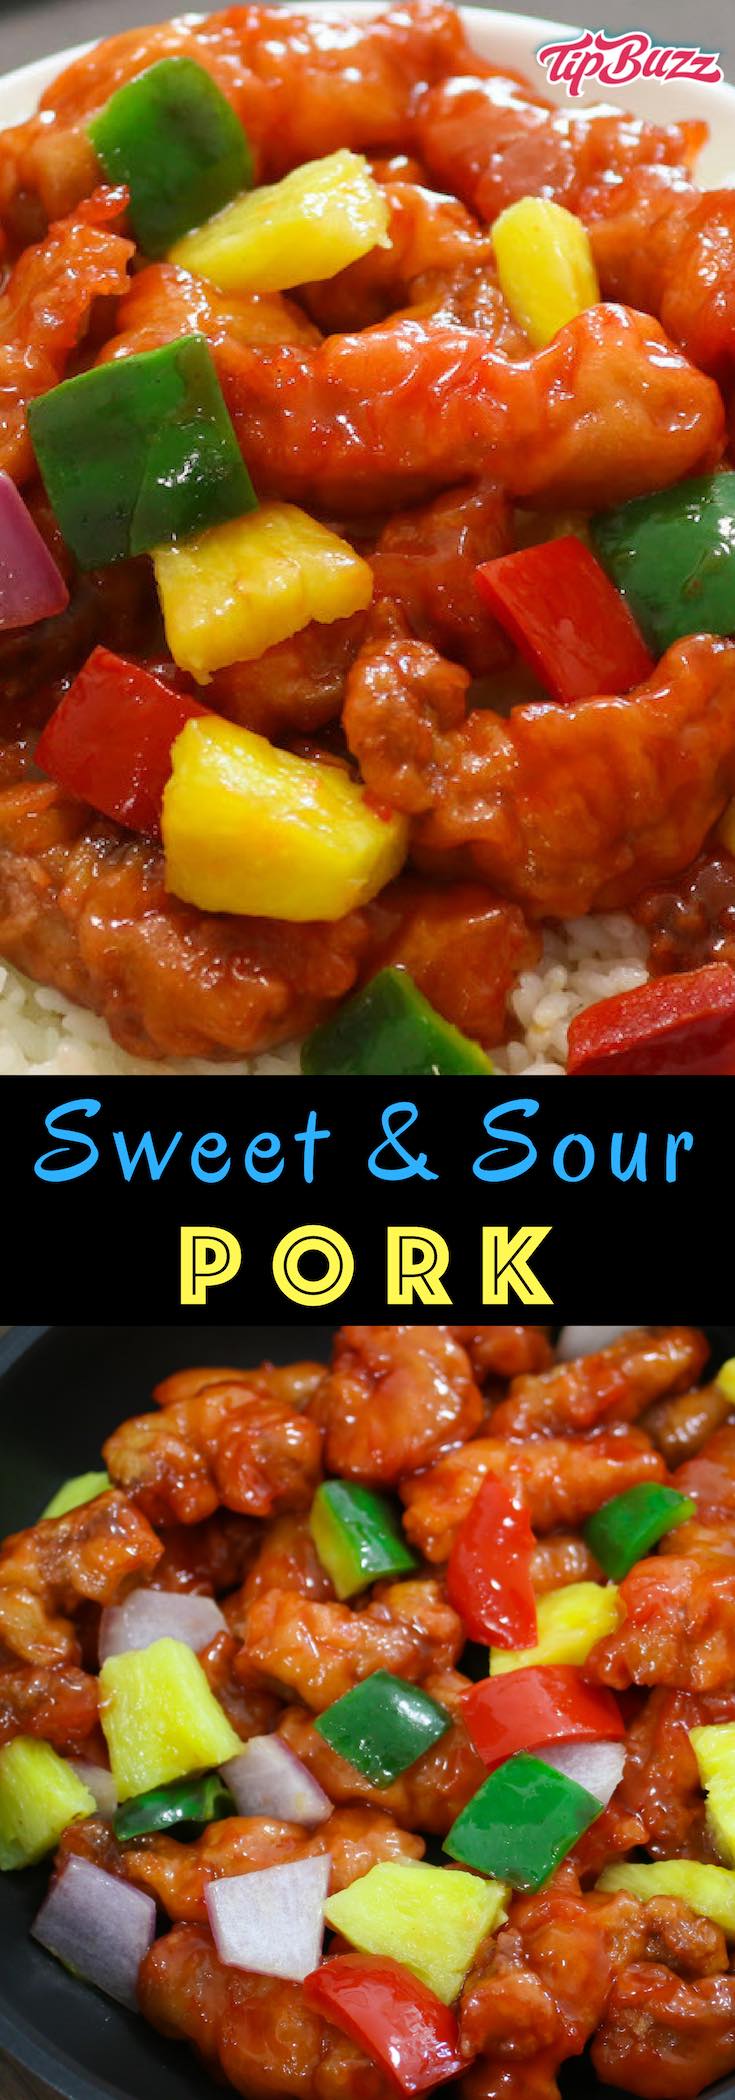 Sweet and Sour Pork - a much loved Chinese main dish you can make at home featuring crispy pieces of tender pork combined with onions, bell peppers and pineapple in a tangy sweet and sour sauce everyone will love. Perfect as a dinner idea and also for a party or potluck.